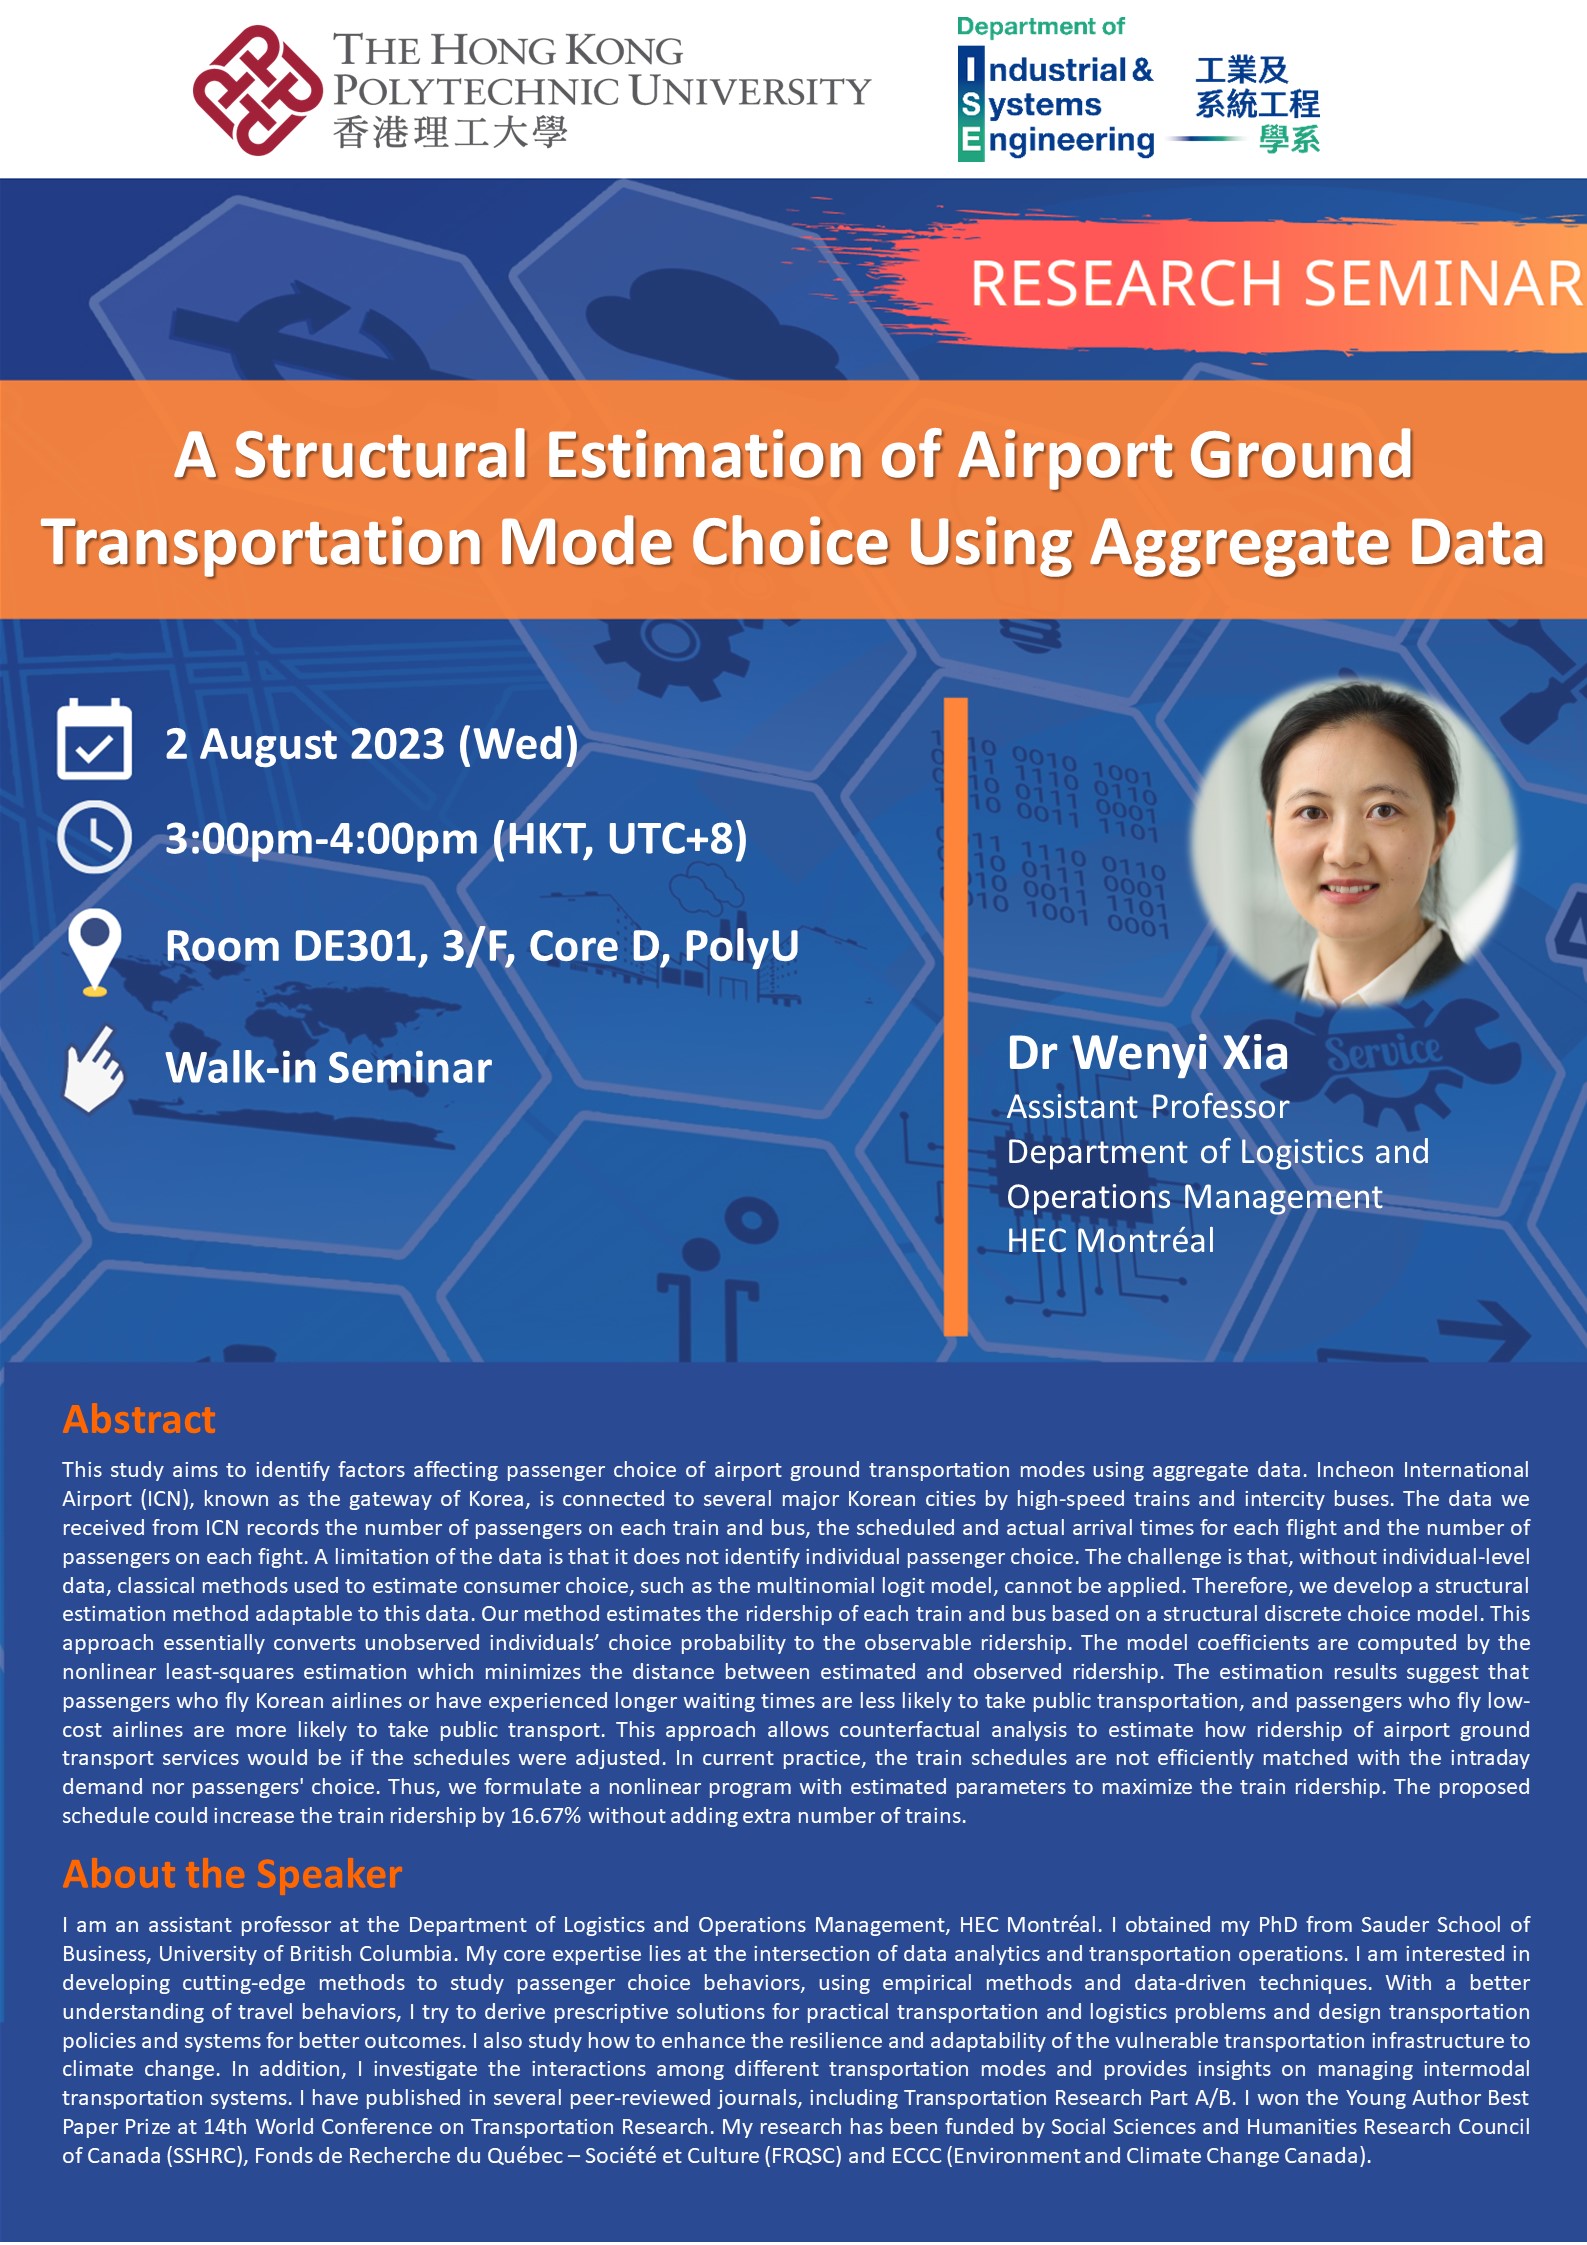 20230802_Dr Wenyi Xia_Poster